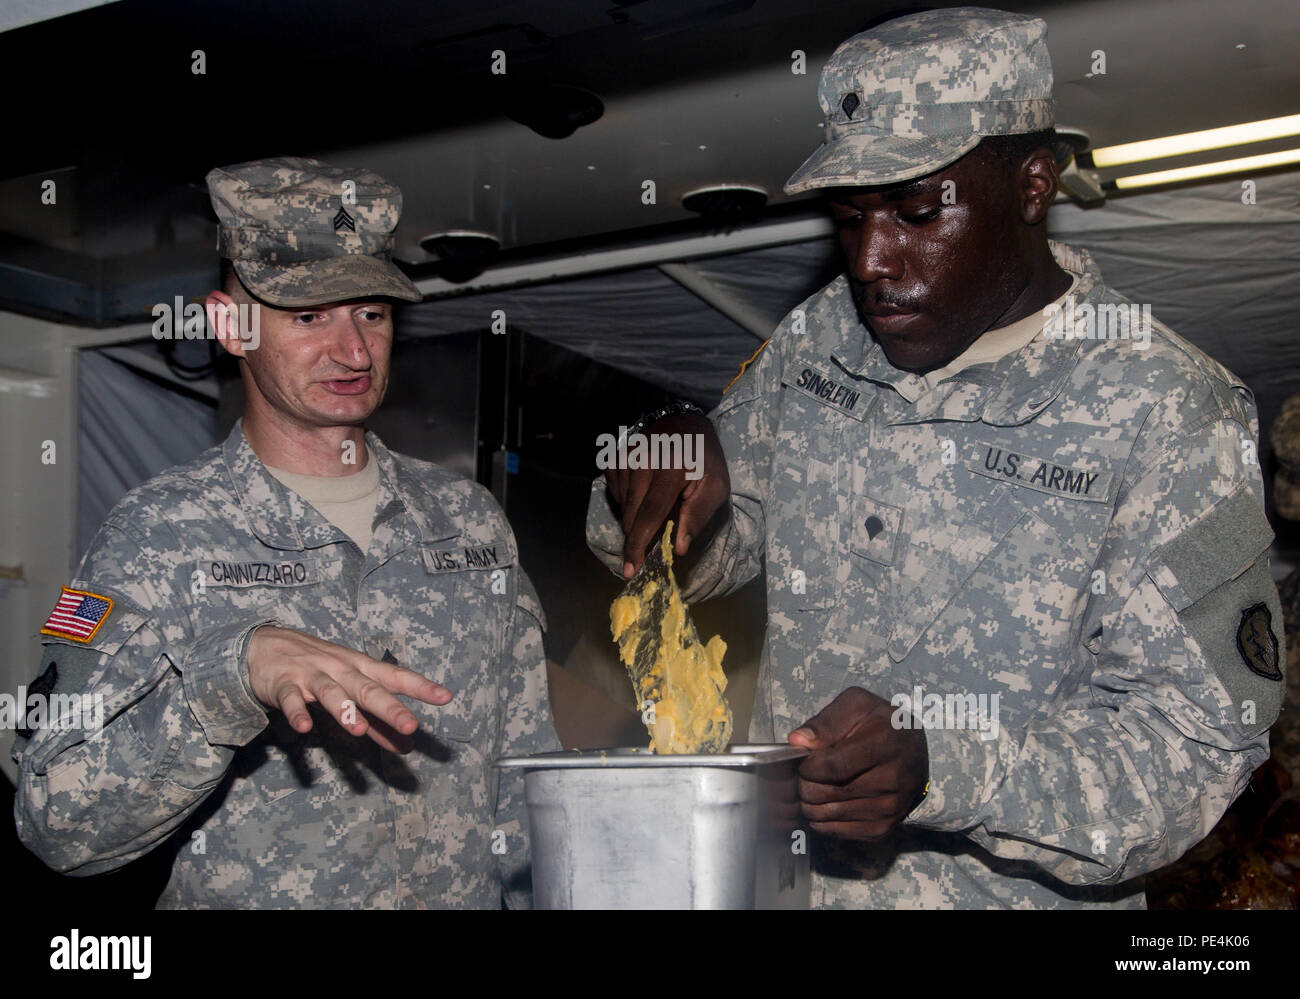 Sgt. Andrew Cannizaro, a food service specialist with Company F, 225th Brigade Support Battalion, 25th Infantry Division, coaches his Soldier, Spc. Gerron Singleton, on the proper way to prepare food Sept. 14 for over 500 Soldiers from 2 SBCT at East Range. A team of nine food specialists from Company F led by Staff Sgt. Derrick Lewellen prepare an evening meal for 2 SBCT Soldiers as well as train for their upcoming Field Conley Competition on Sept. 29. (U.S. Army photo by Sgt. Ian Ives, 2nd Stryker Brigade Combat Team Public Affairs/Released) Stock Photo